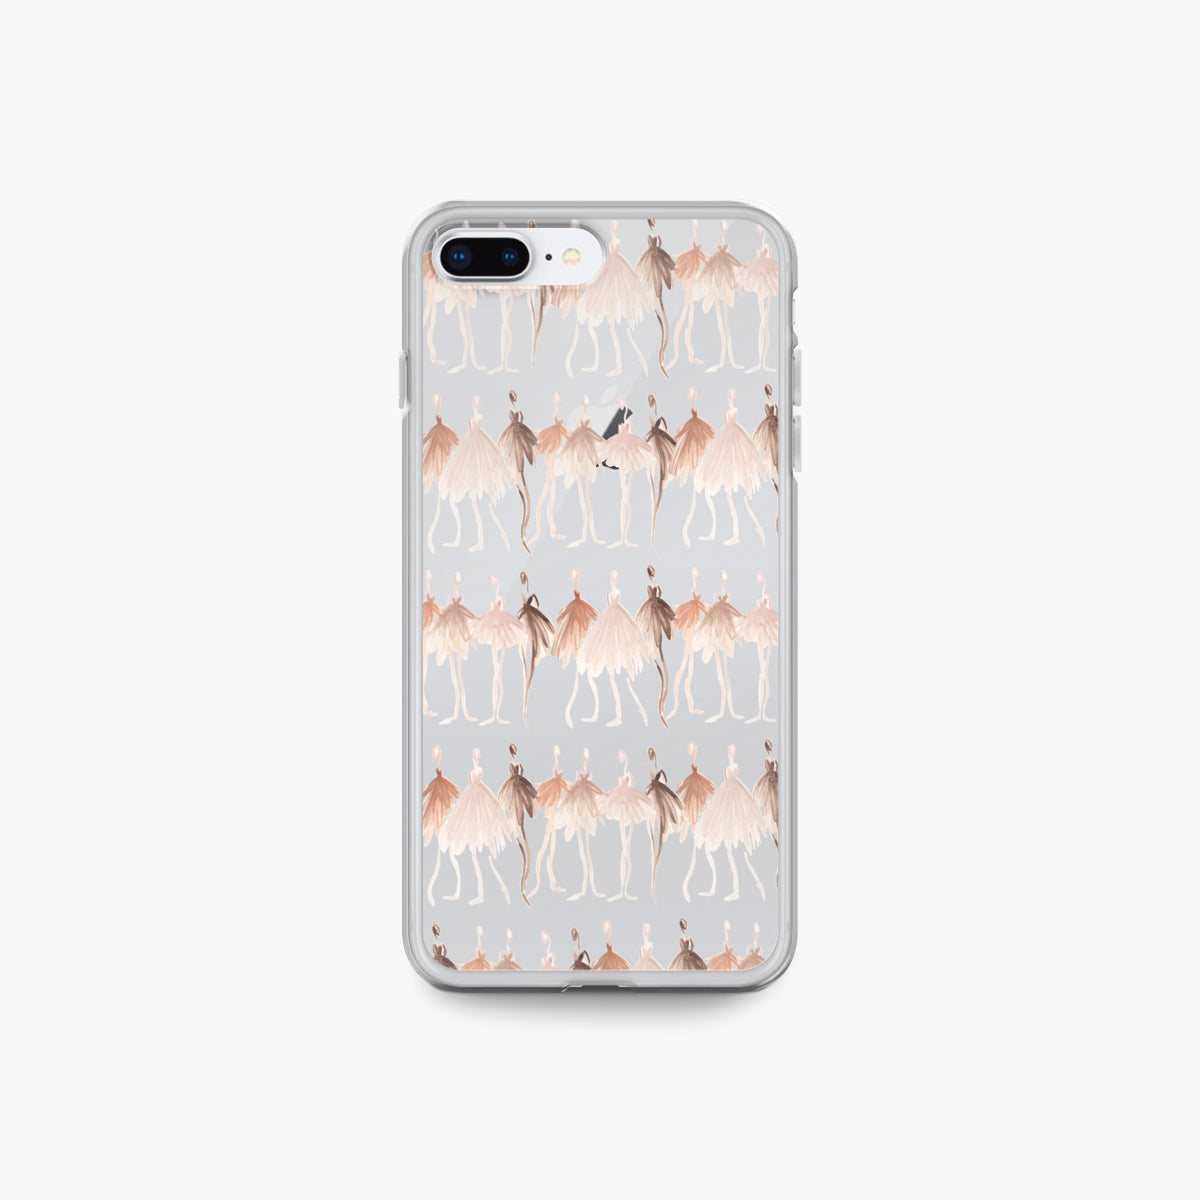 Colors of Ballet iPhone Case | Ballet, iPhone| Pointebrush Ballet Art and Lifestyle